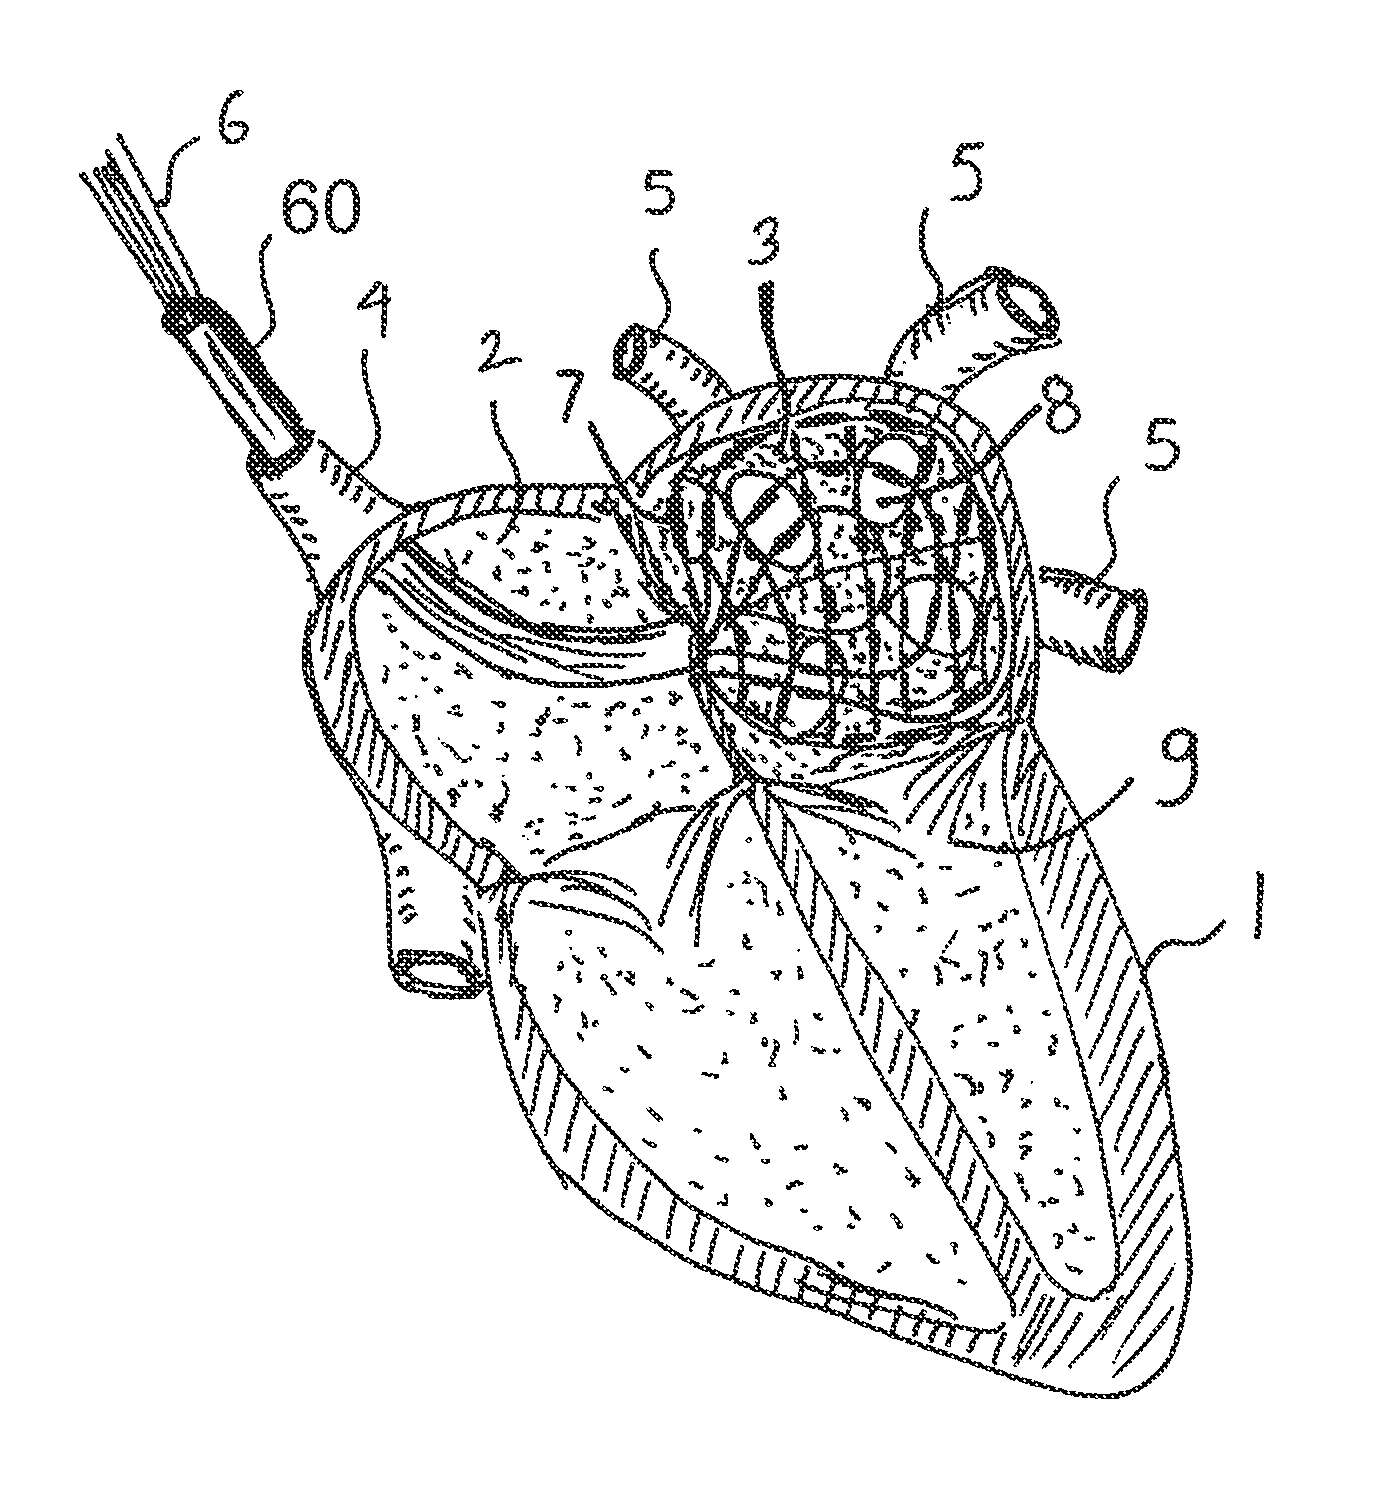 Apparatus and method for intra-cardiac mapping and ablation